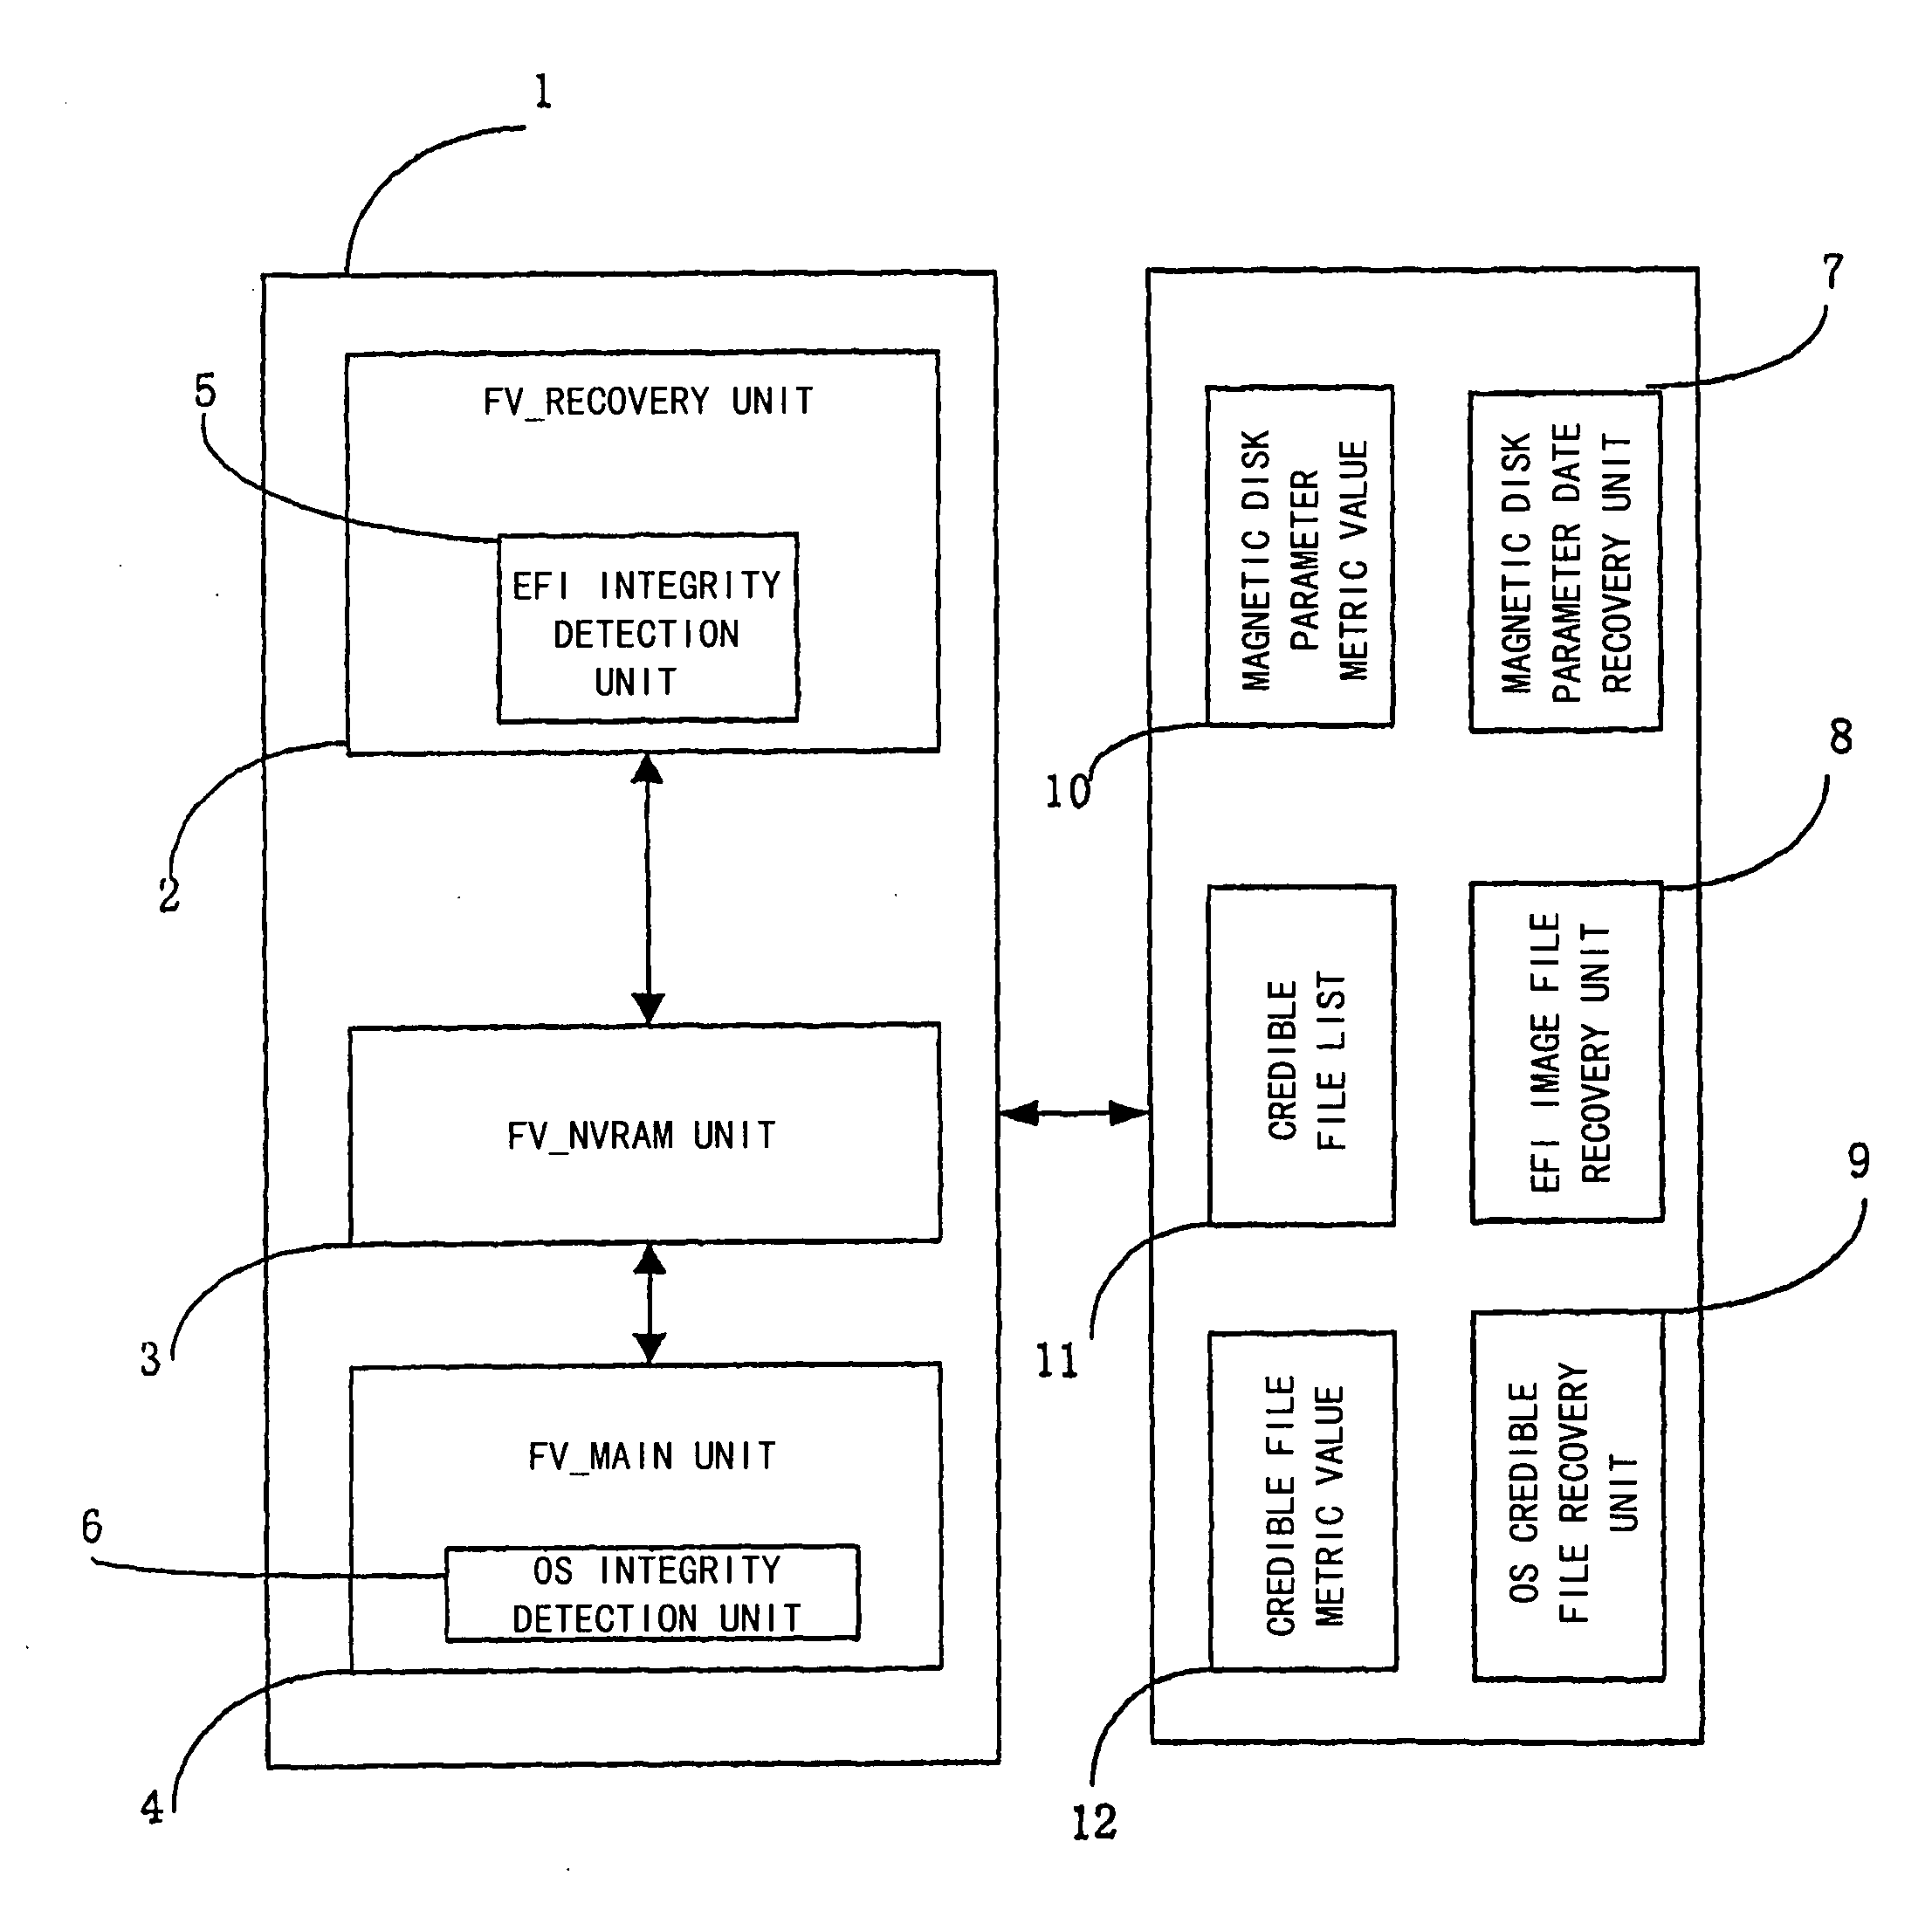 Computer System and Method for Performing Integrity Detection on the Same